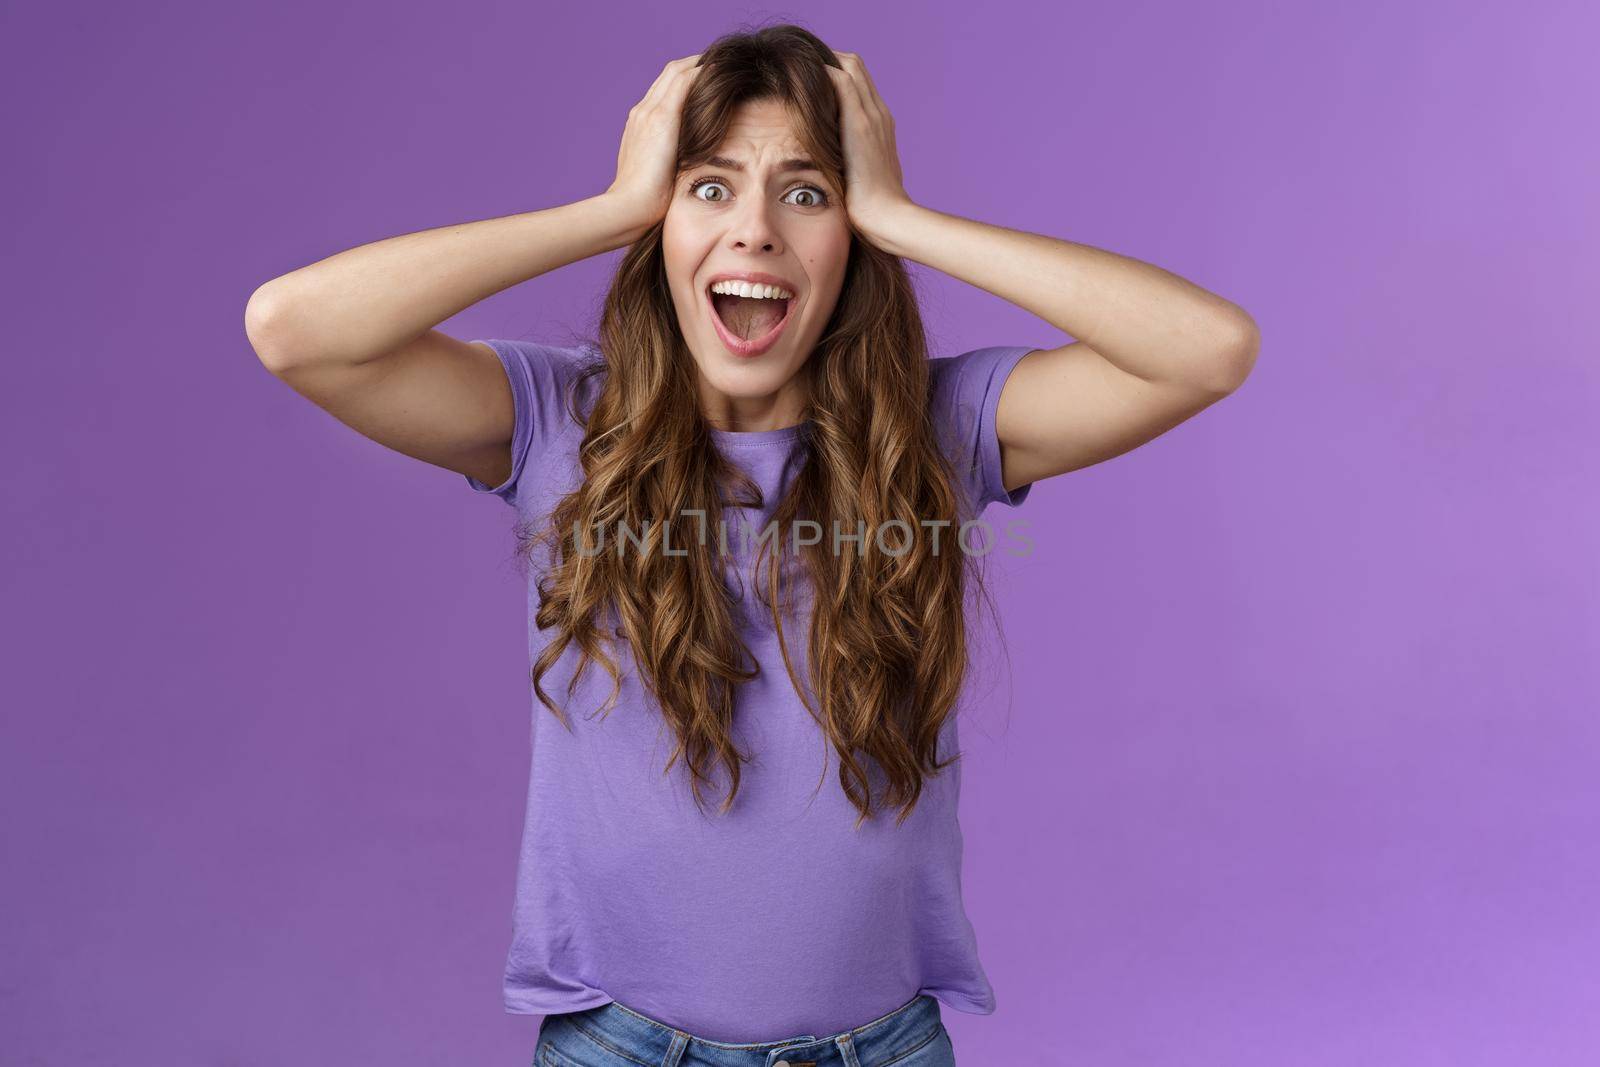 Shocked upset disappointed curly girl shouting sorrow face troublesome shocking situation grab head scream panic outraged pissed and angry, standing distressed purple background. Copy space